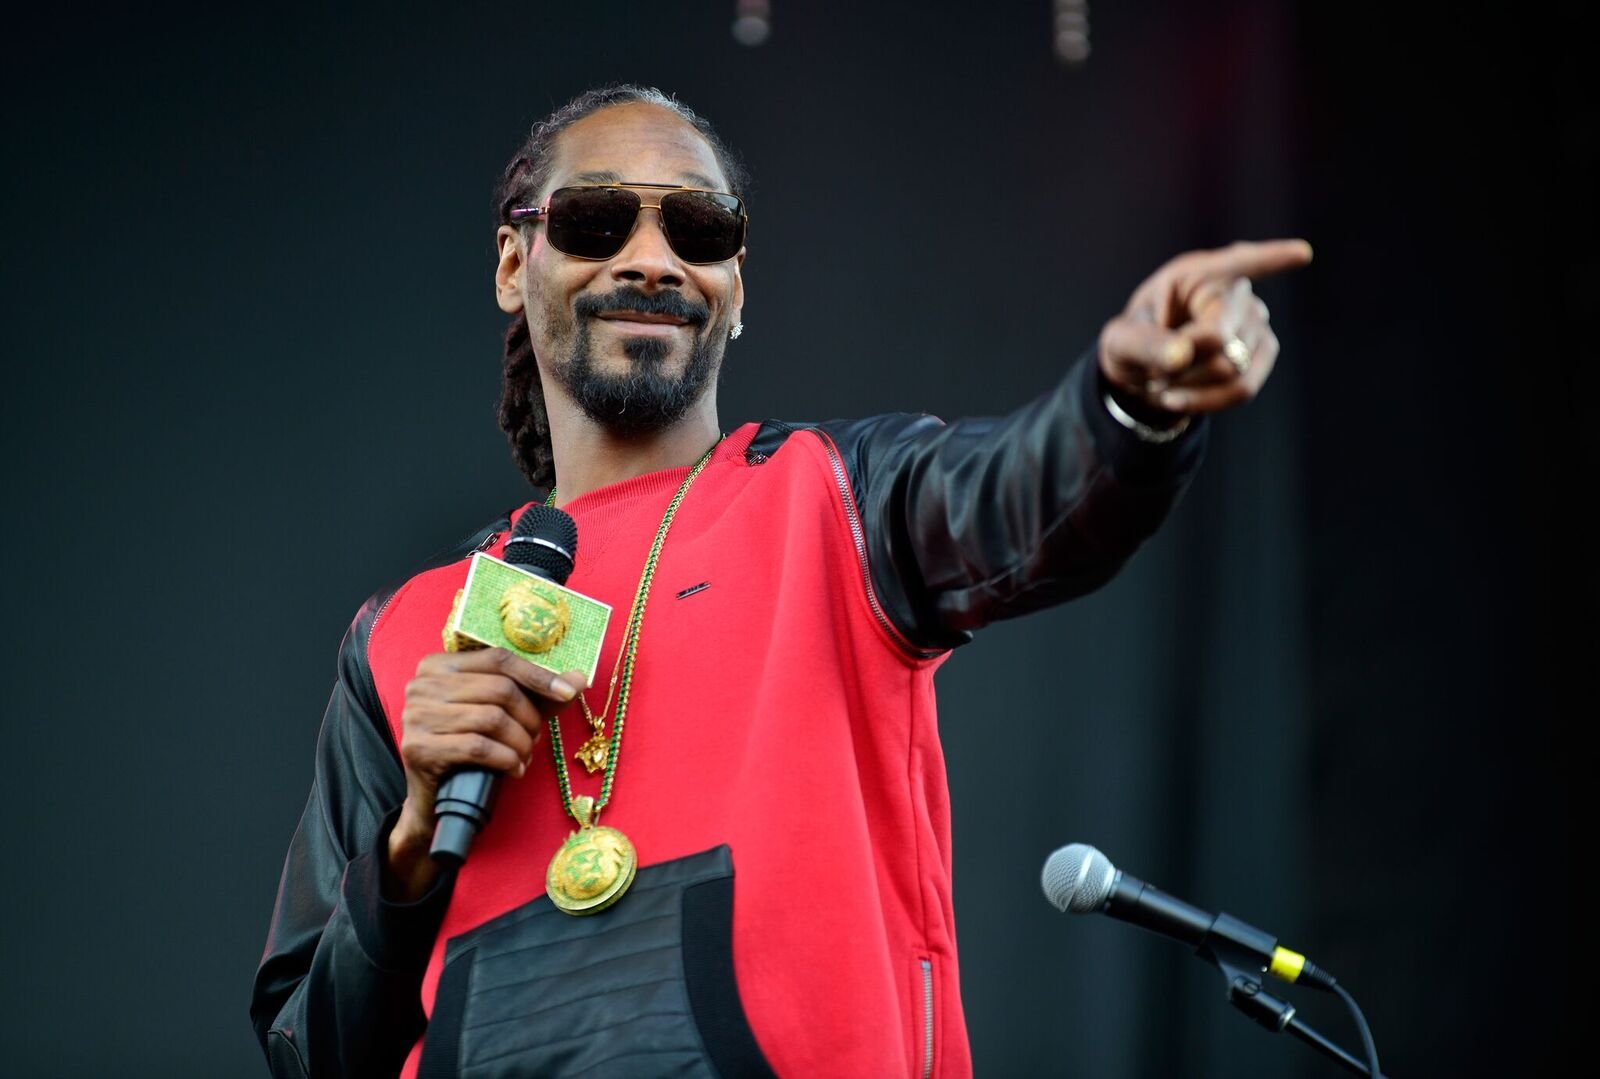 Snoop Dogg performs onstage at the SXSW Outdoor Stage at Butler Park during the 2014 SXSW Music, Film + Interactive Festival at Butler Park on March 15, 2014 | Photo: Getty Images